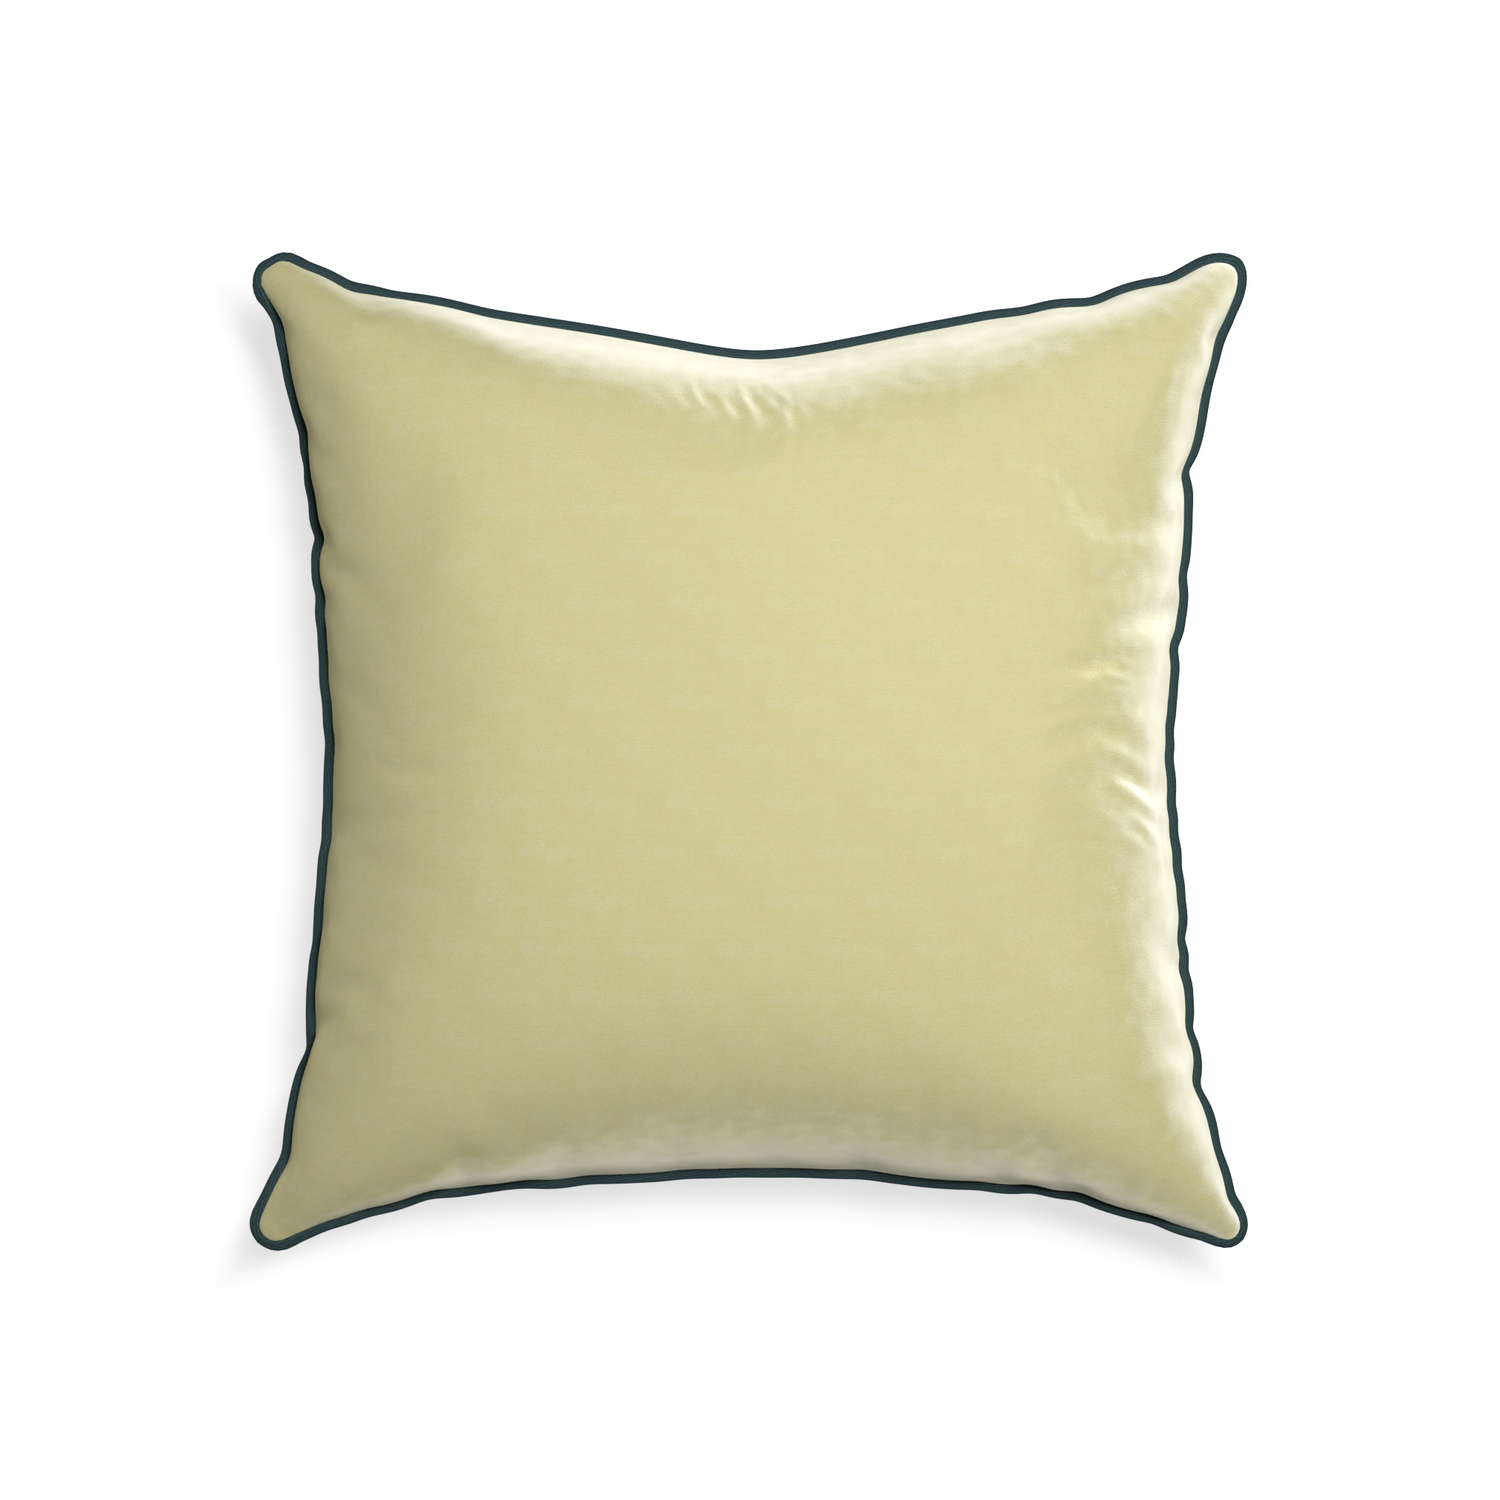 22-square pear velvet custom light greenpillow with p piping on white background